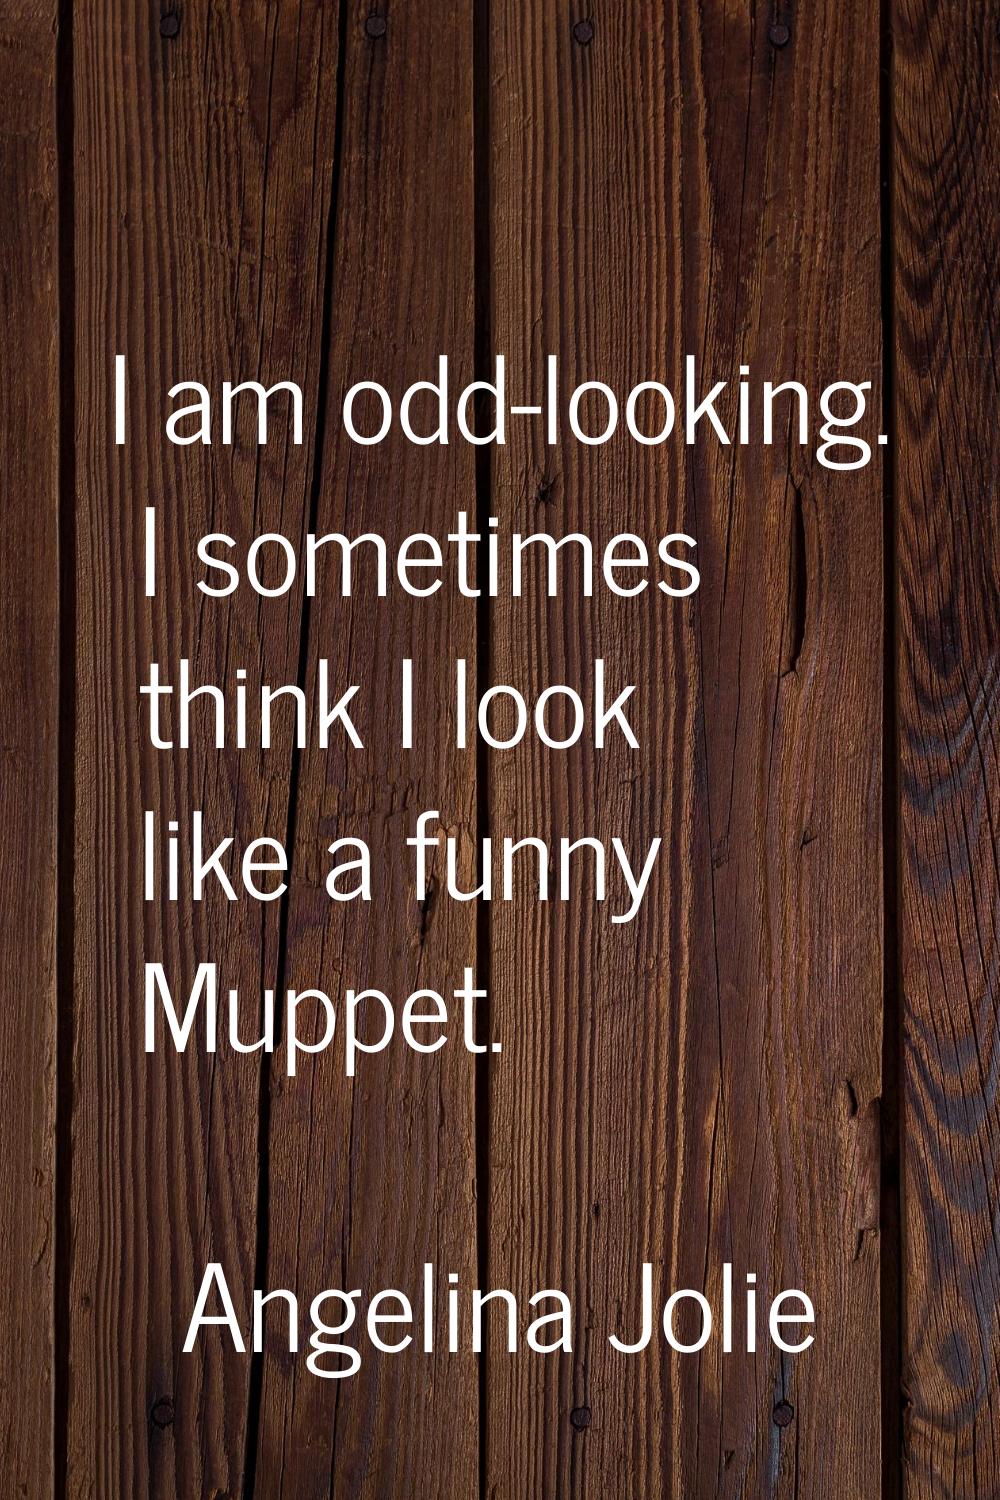 I am odd-looking. I sometimes think I look like a funny Muppet.